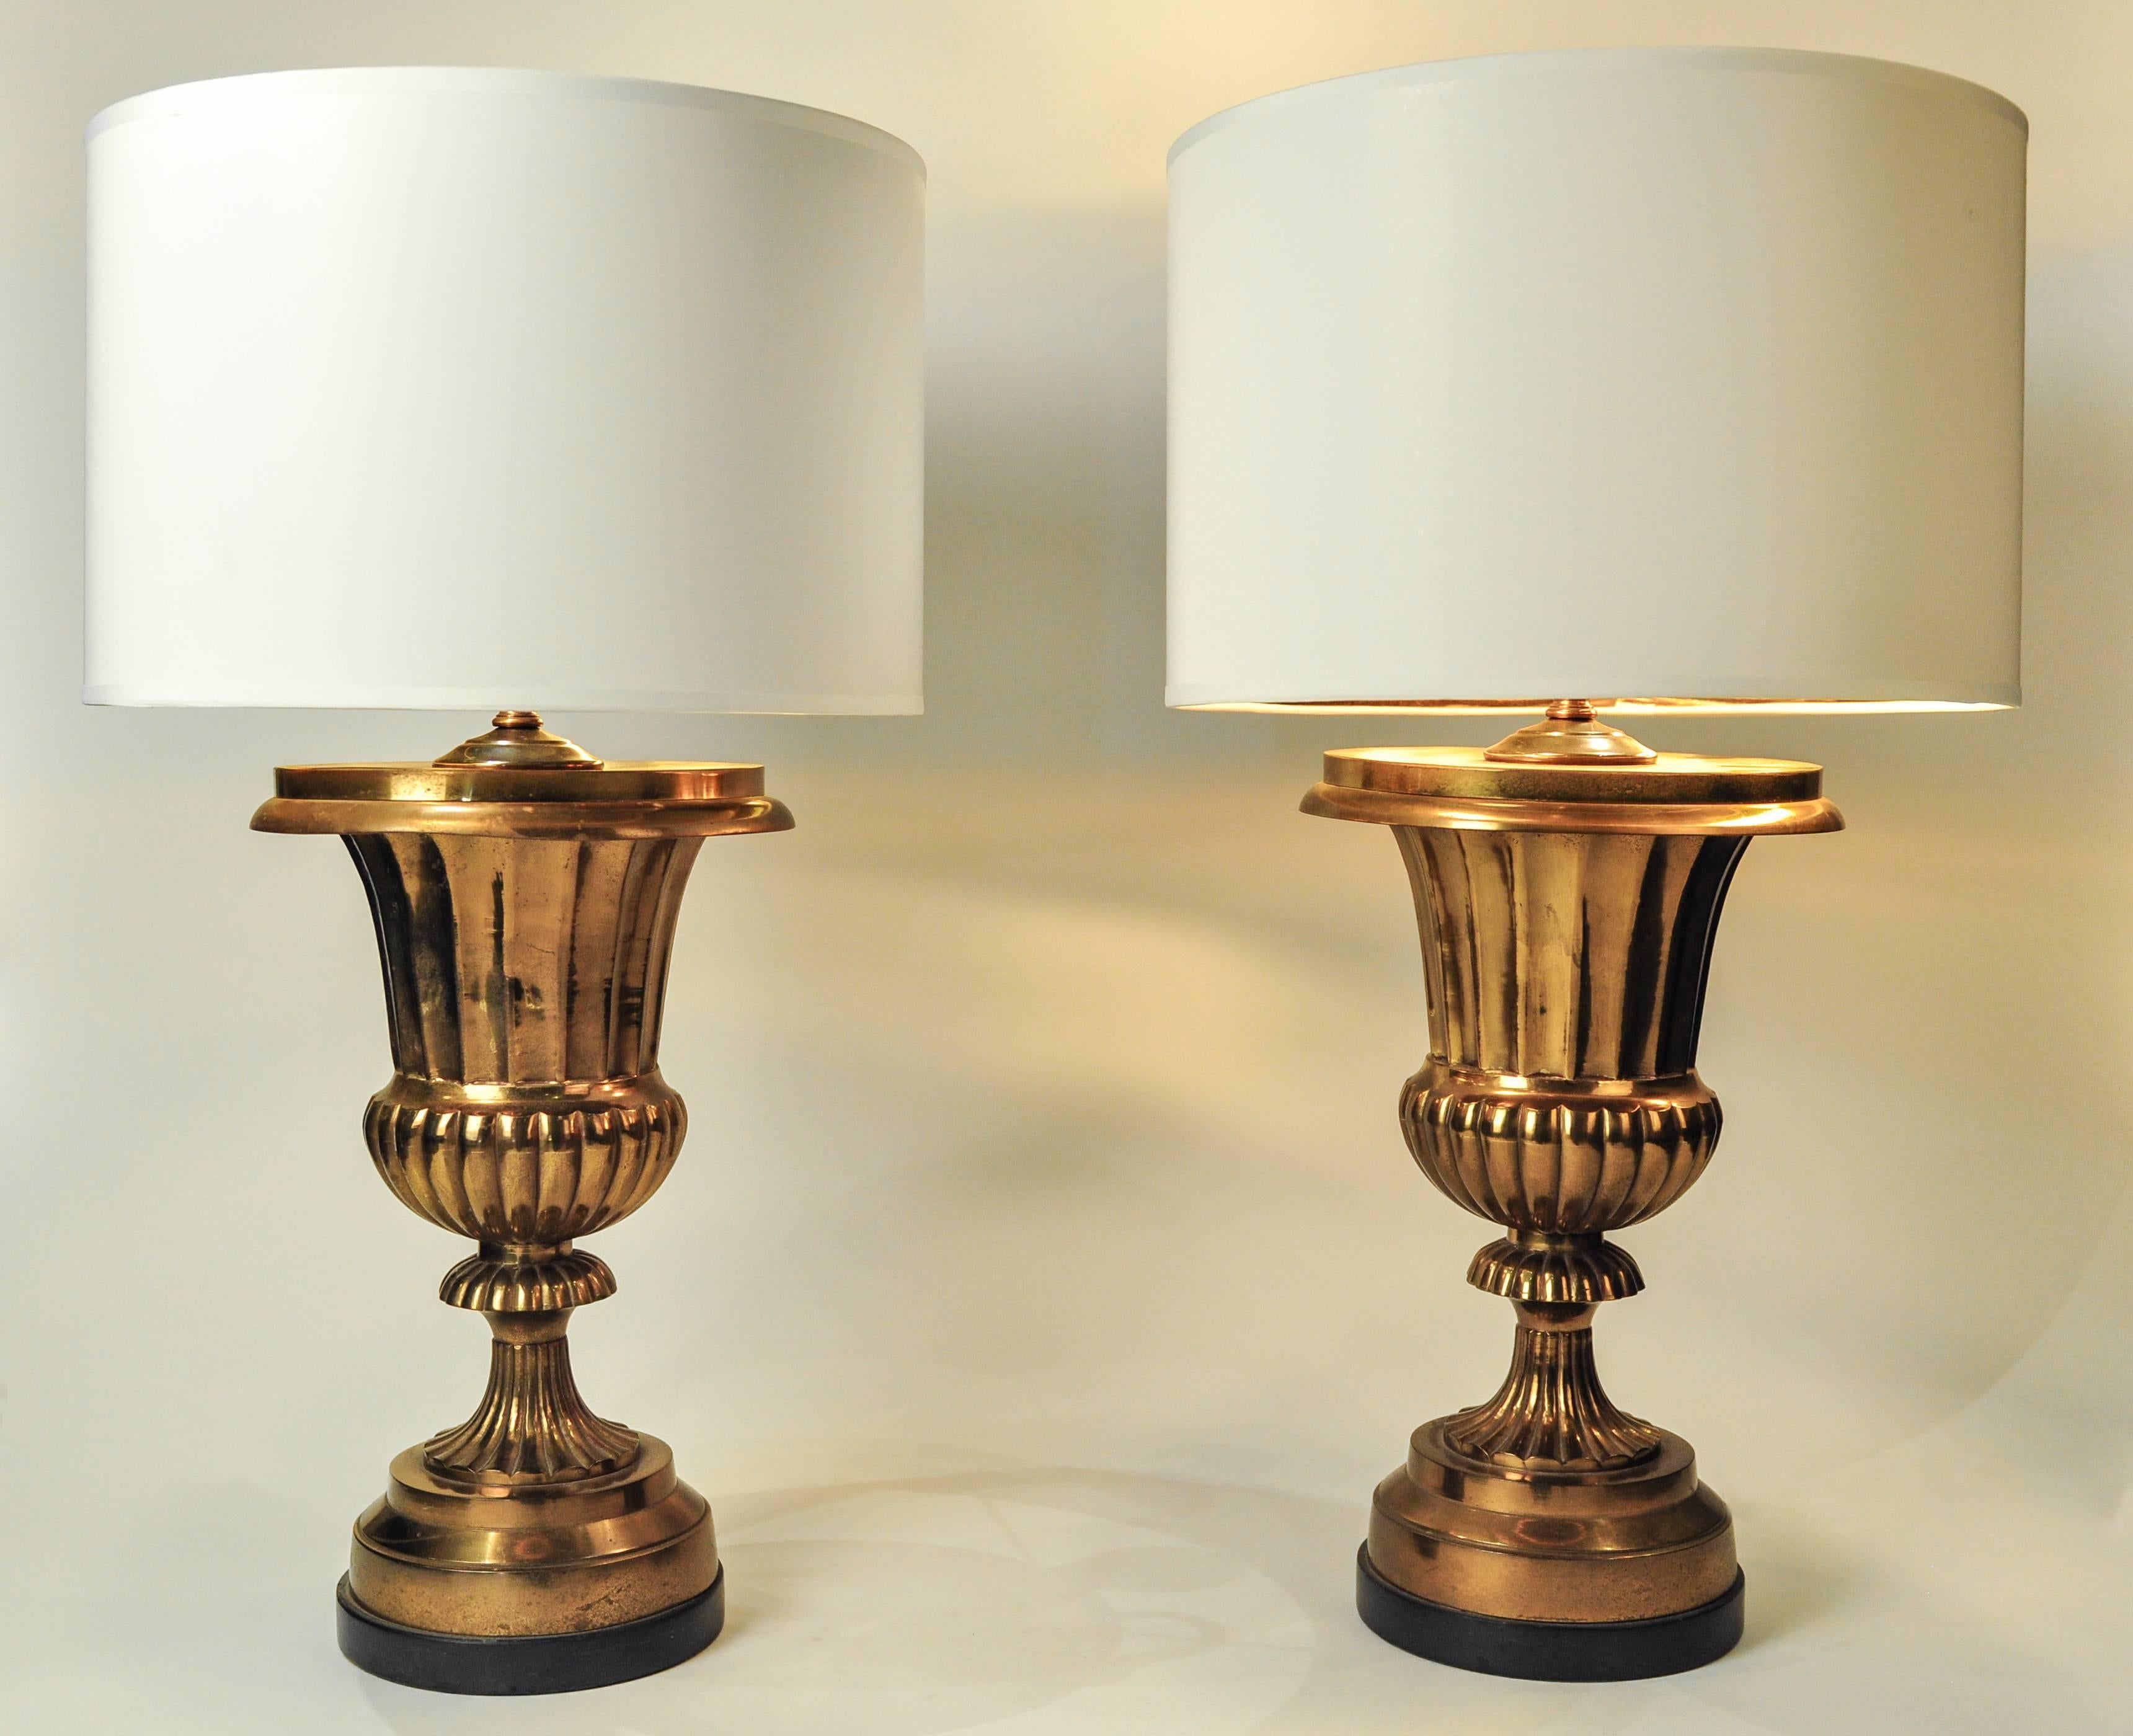 Mid-20th Century Vintage Pair of Solid Brass Task or Table Lamps